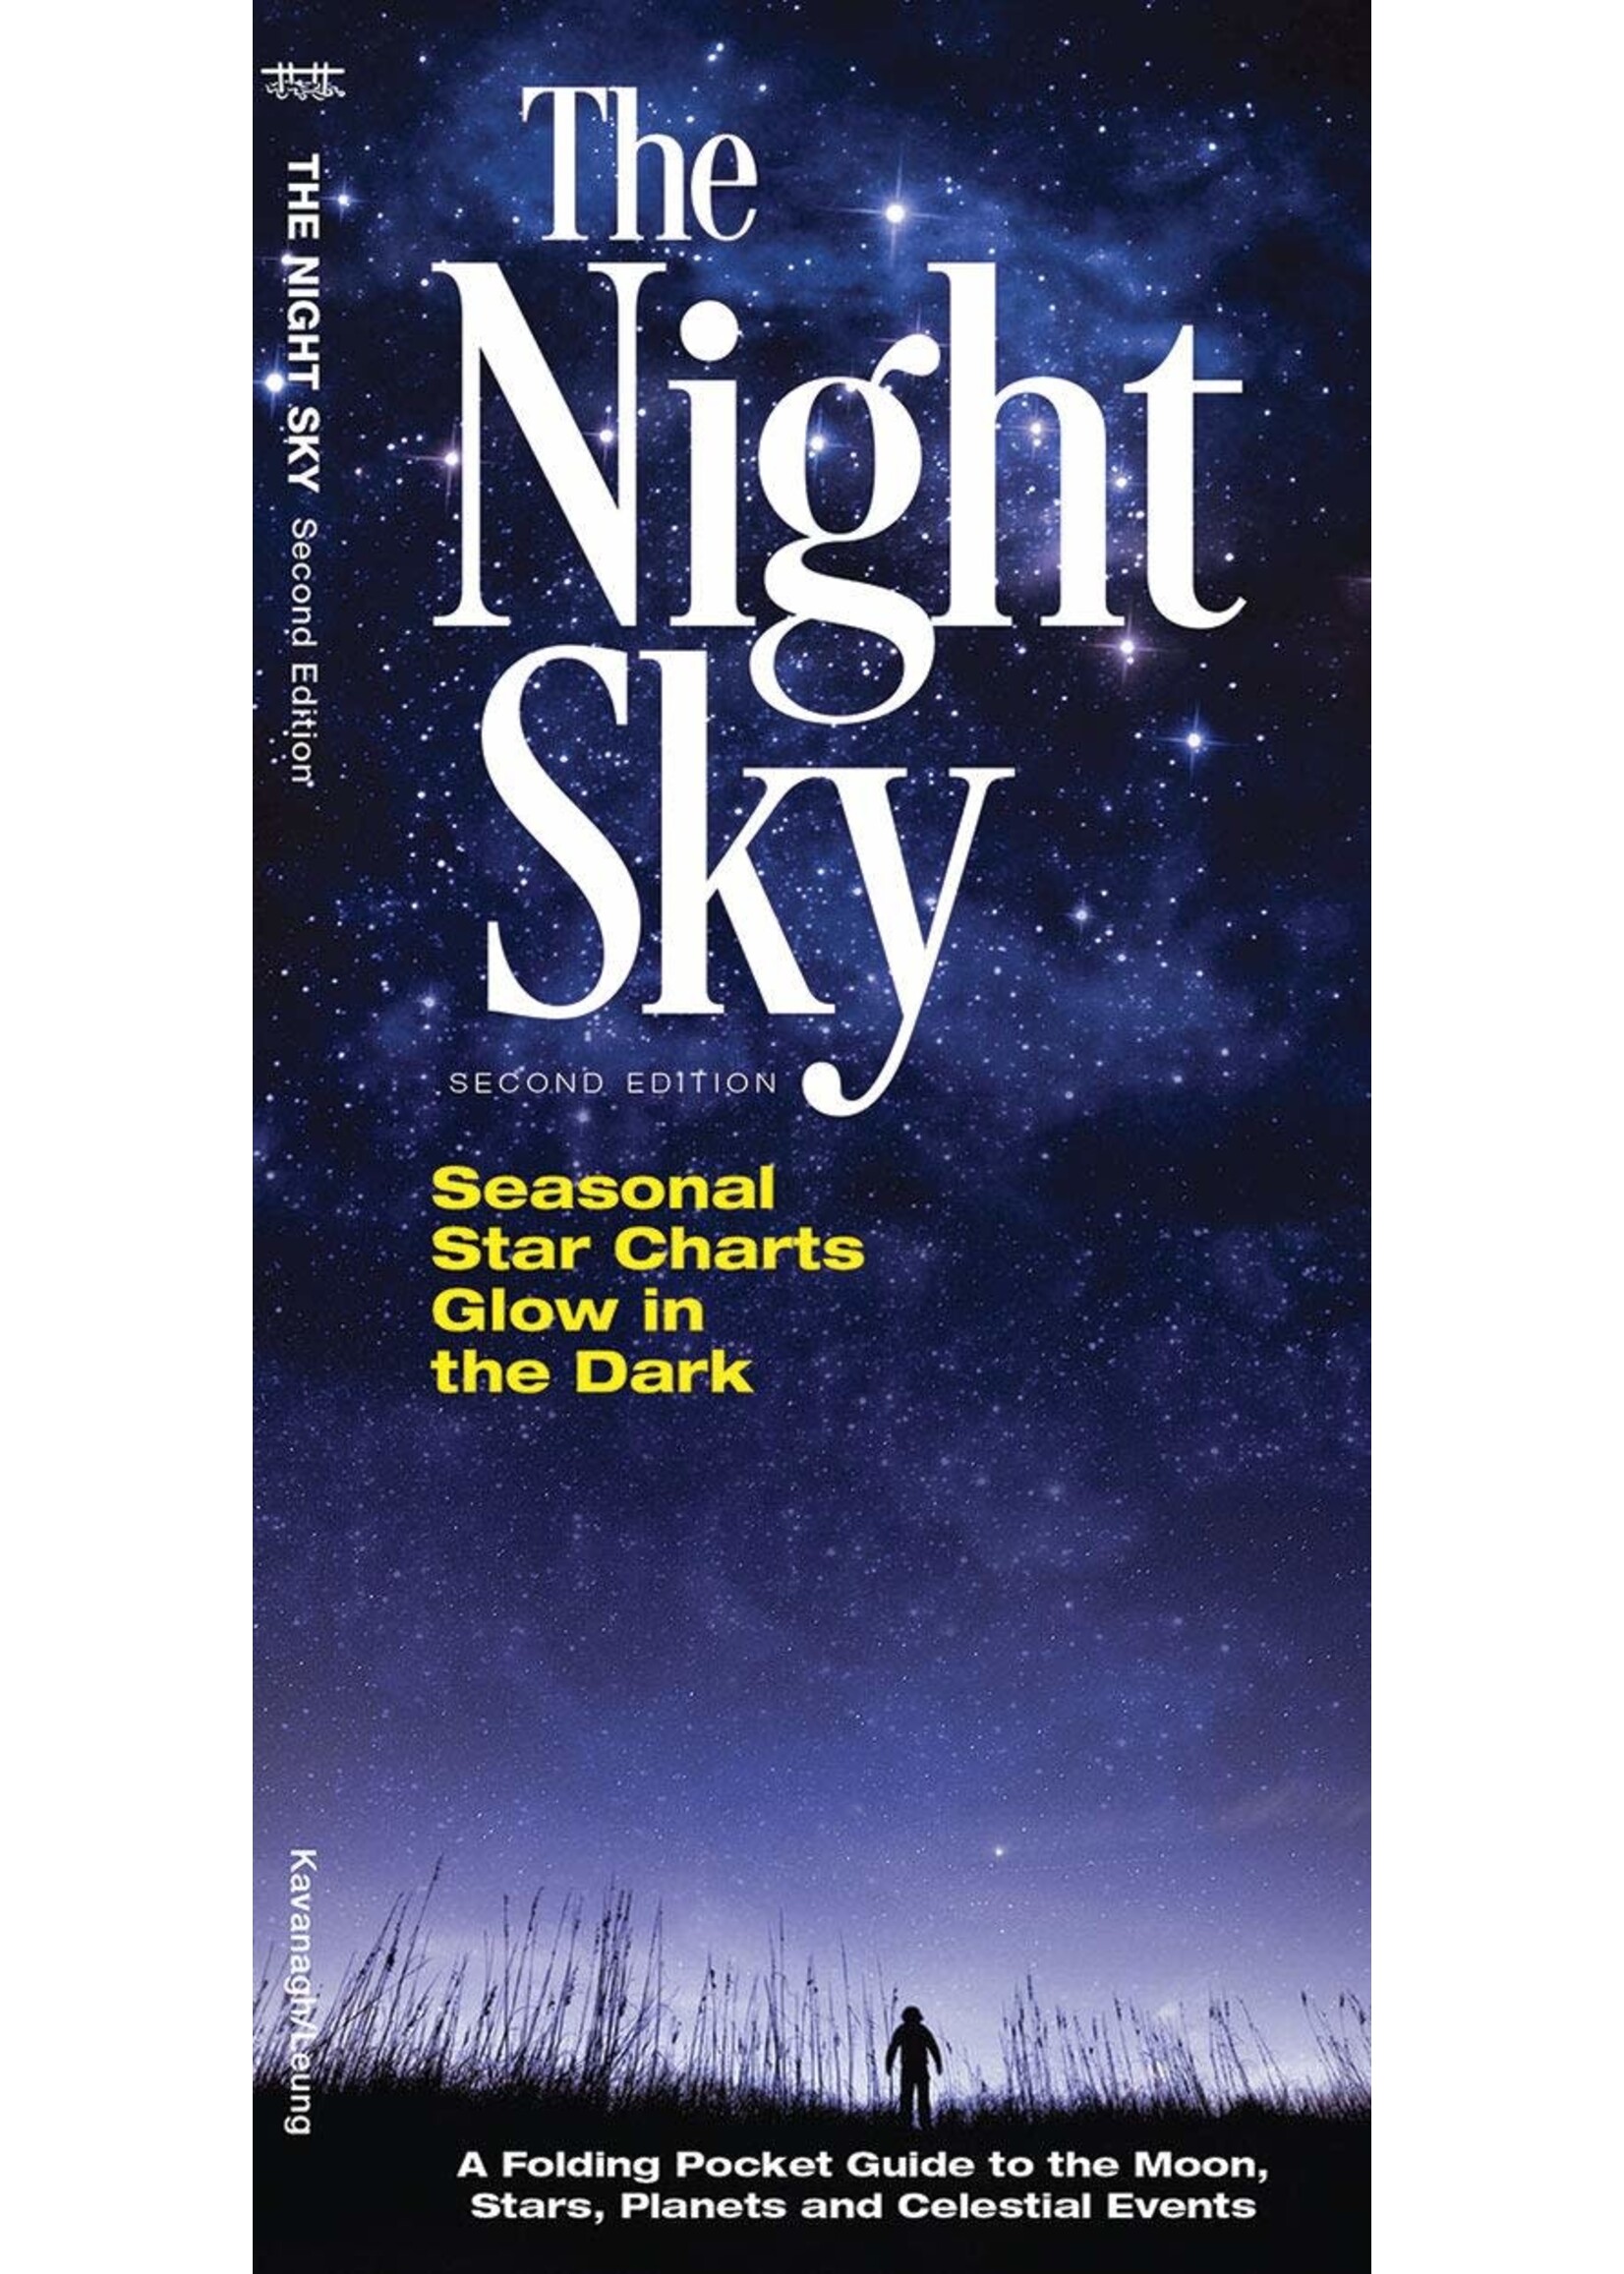 The Night Sky: A Folding Pocket Guide to the Moon, Stars, Planets, and Celestial Events 2nd Edition